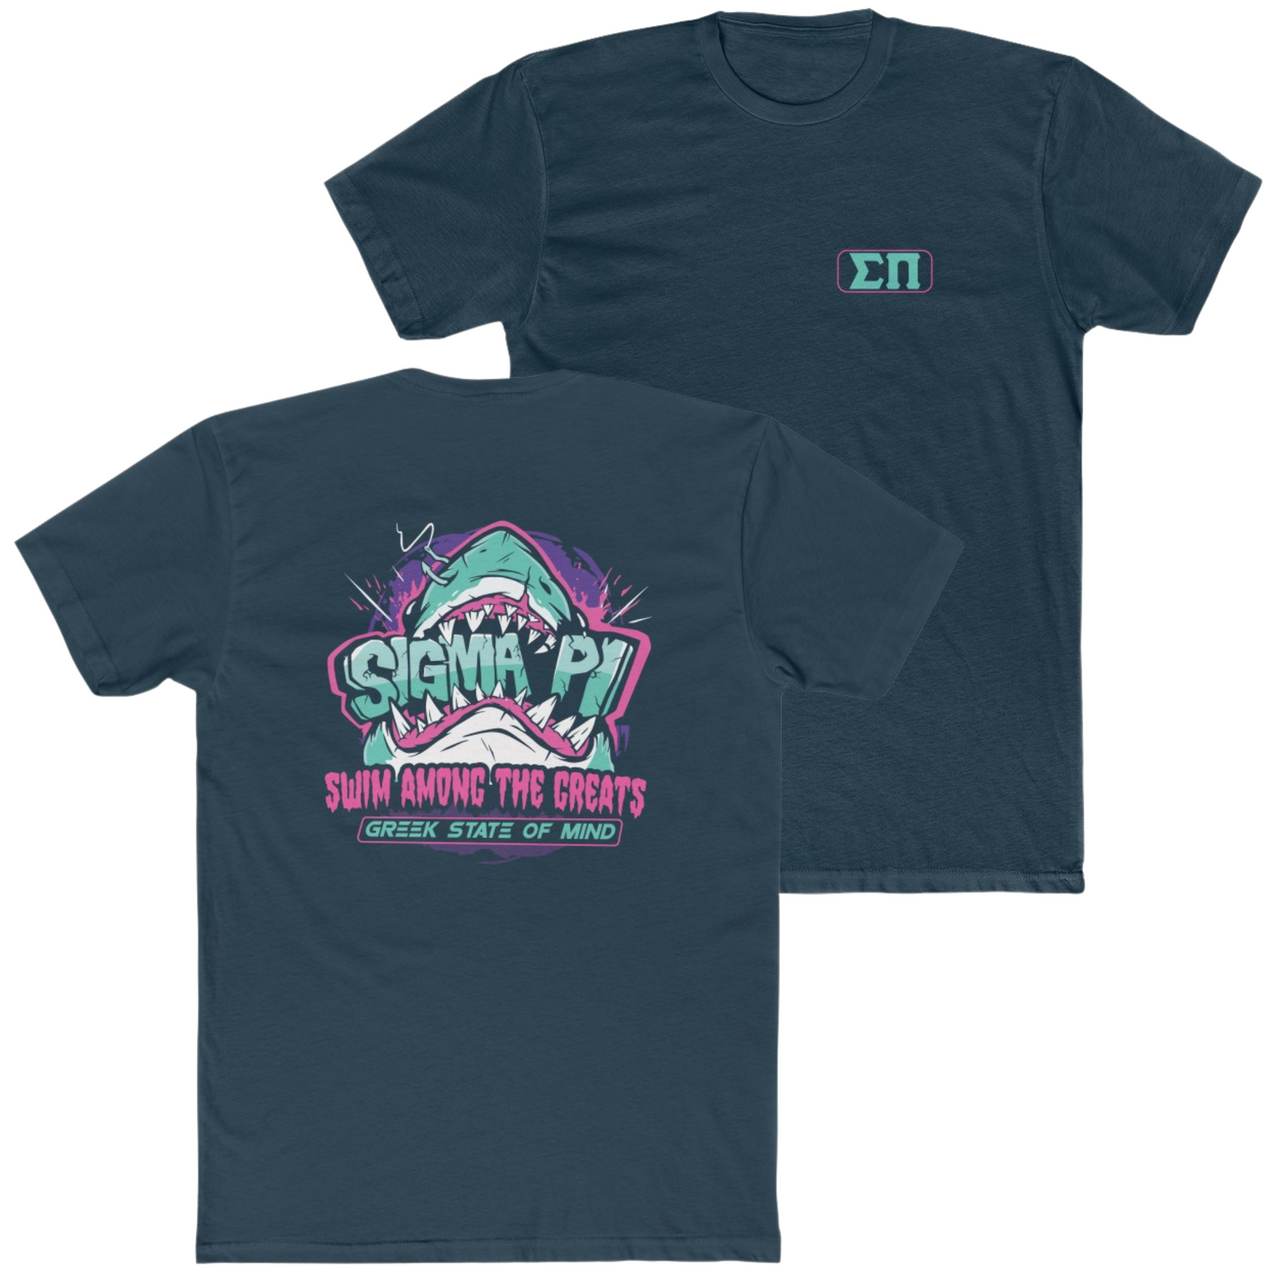 Navy Sigma Pi Graphic T-Shirt | The Deep End | Sigma Pi Apparel and Merchandise